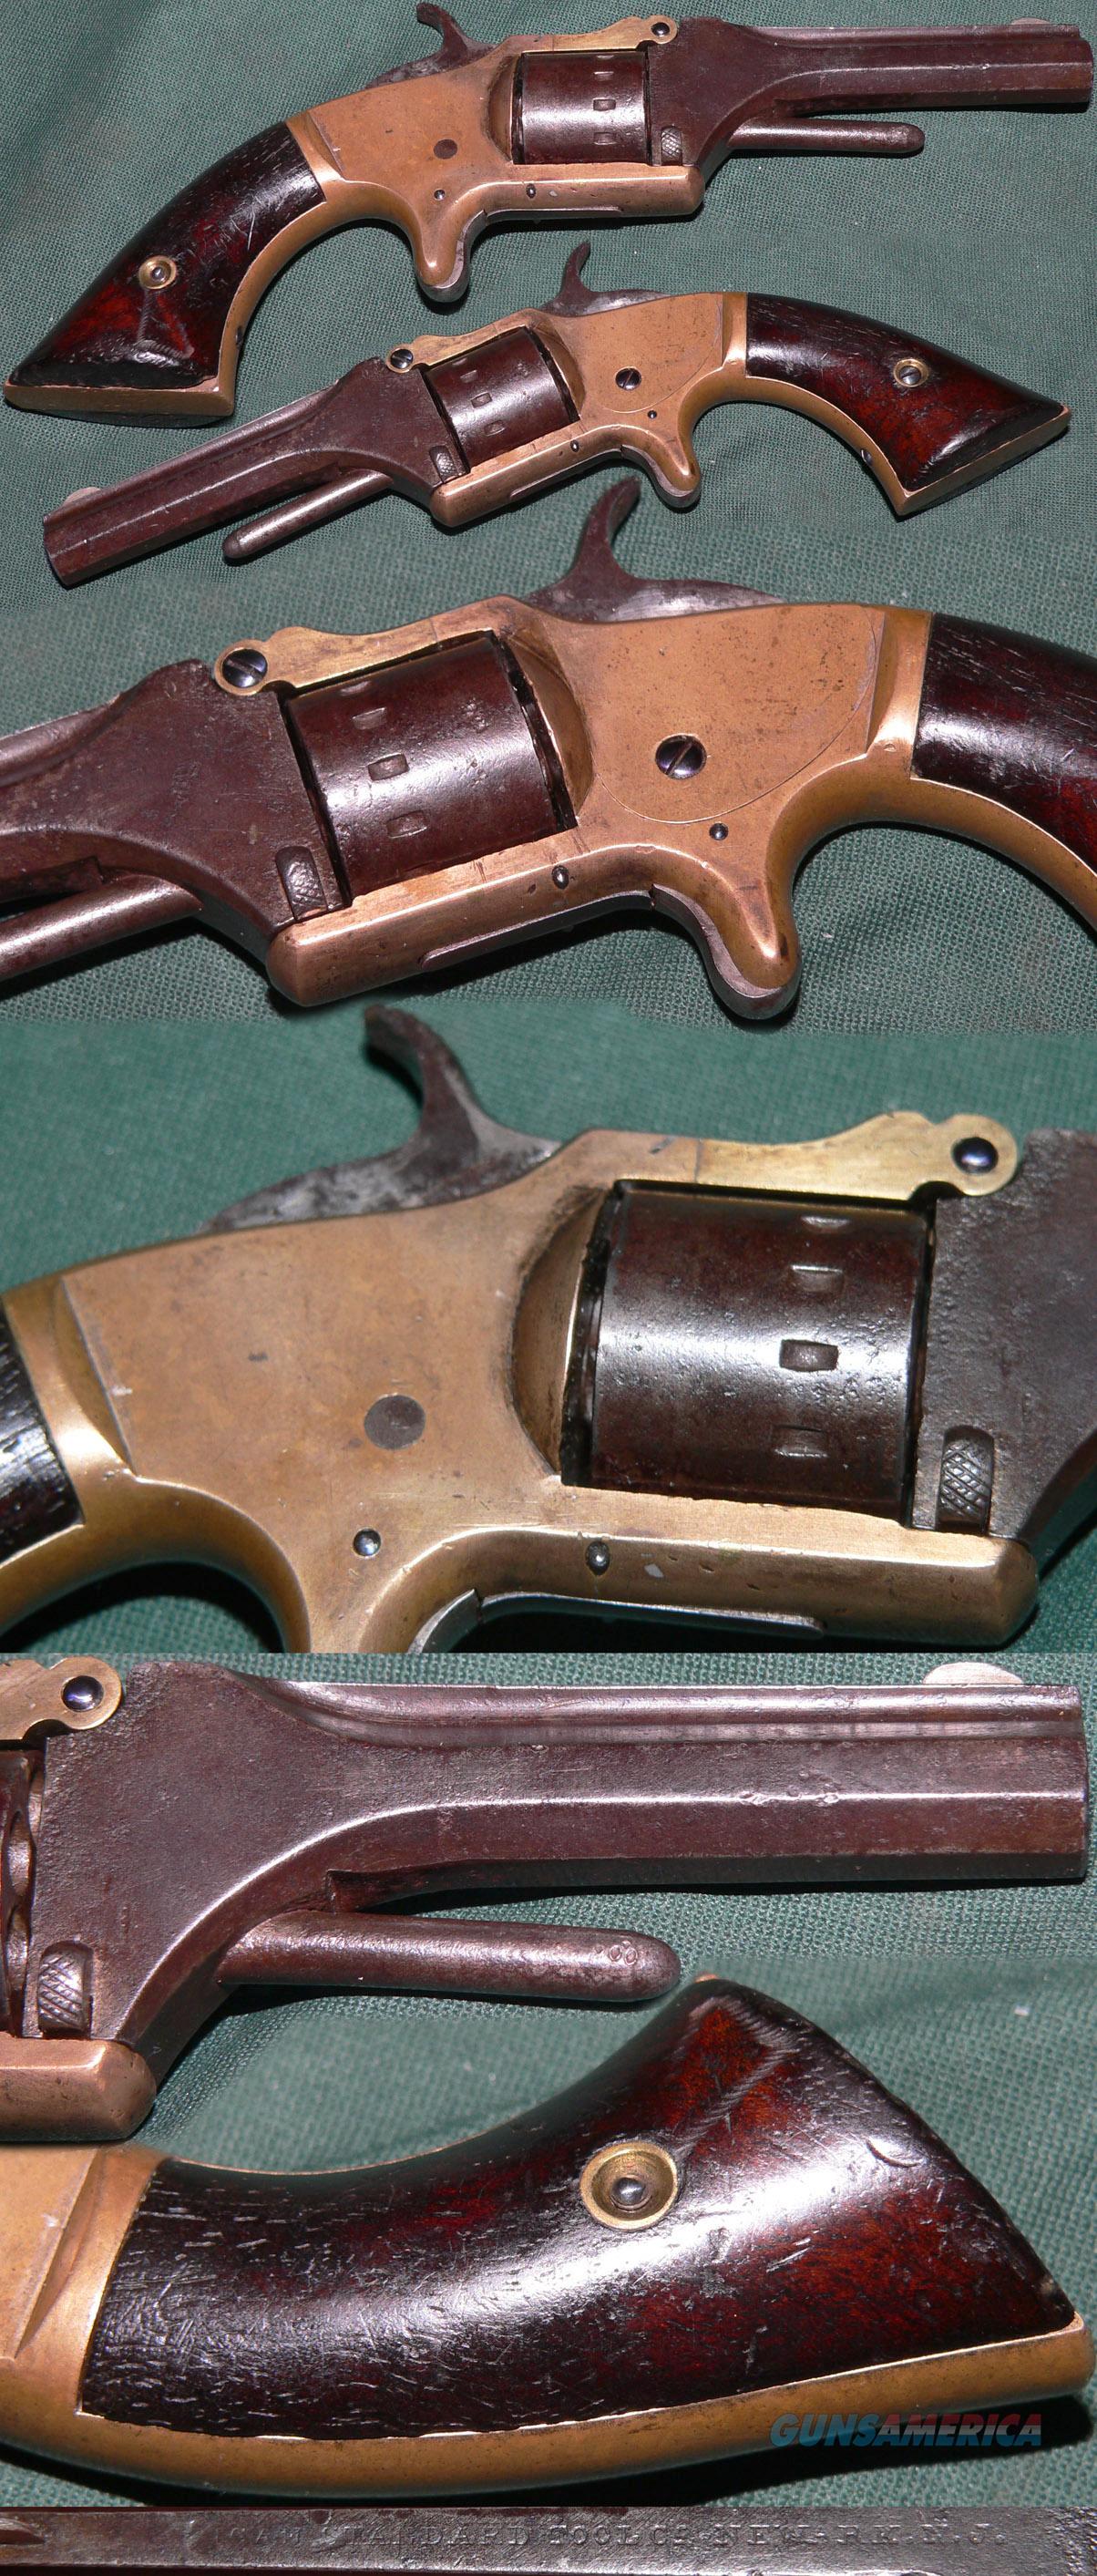 American Standard Revolver Backgrounds, Compatible - PC, Mobile, Gadgets| 1204x2826 px